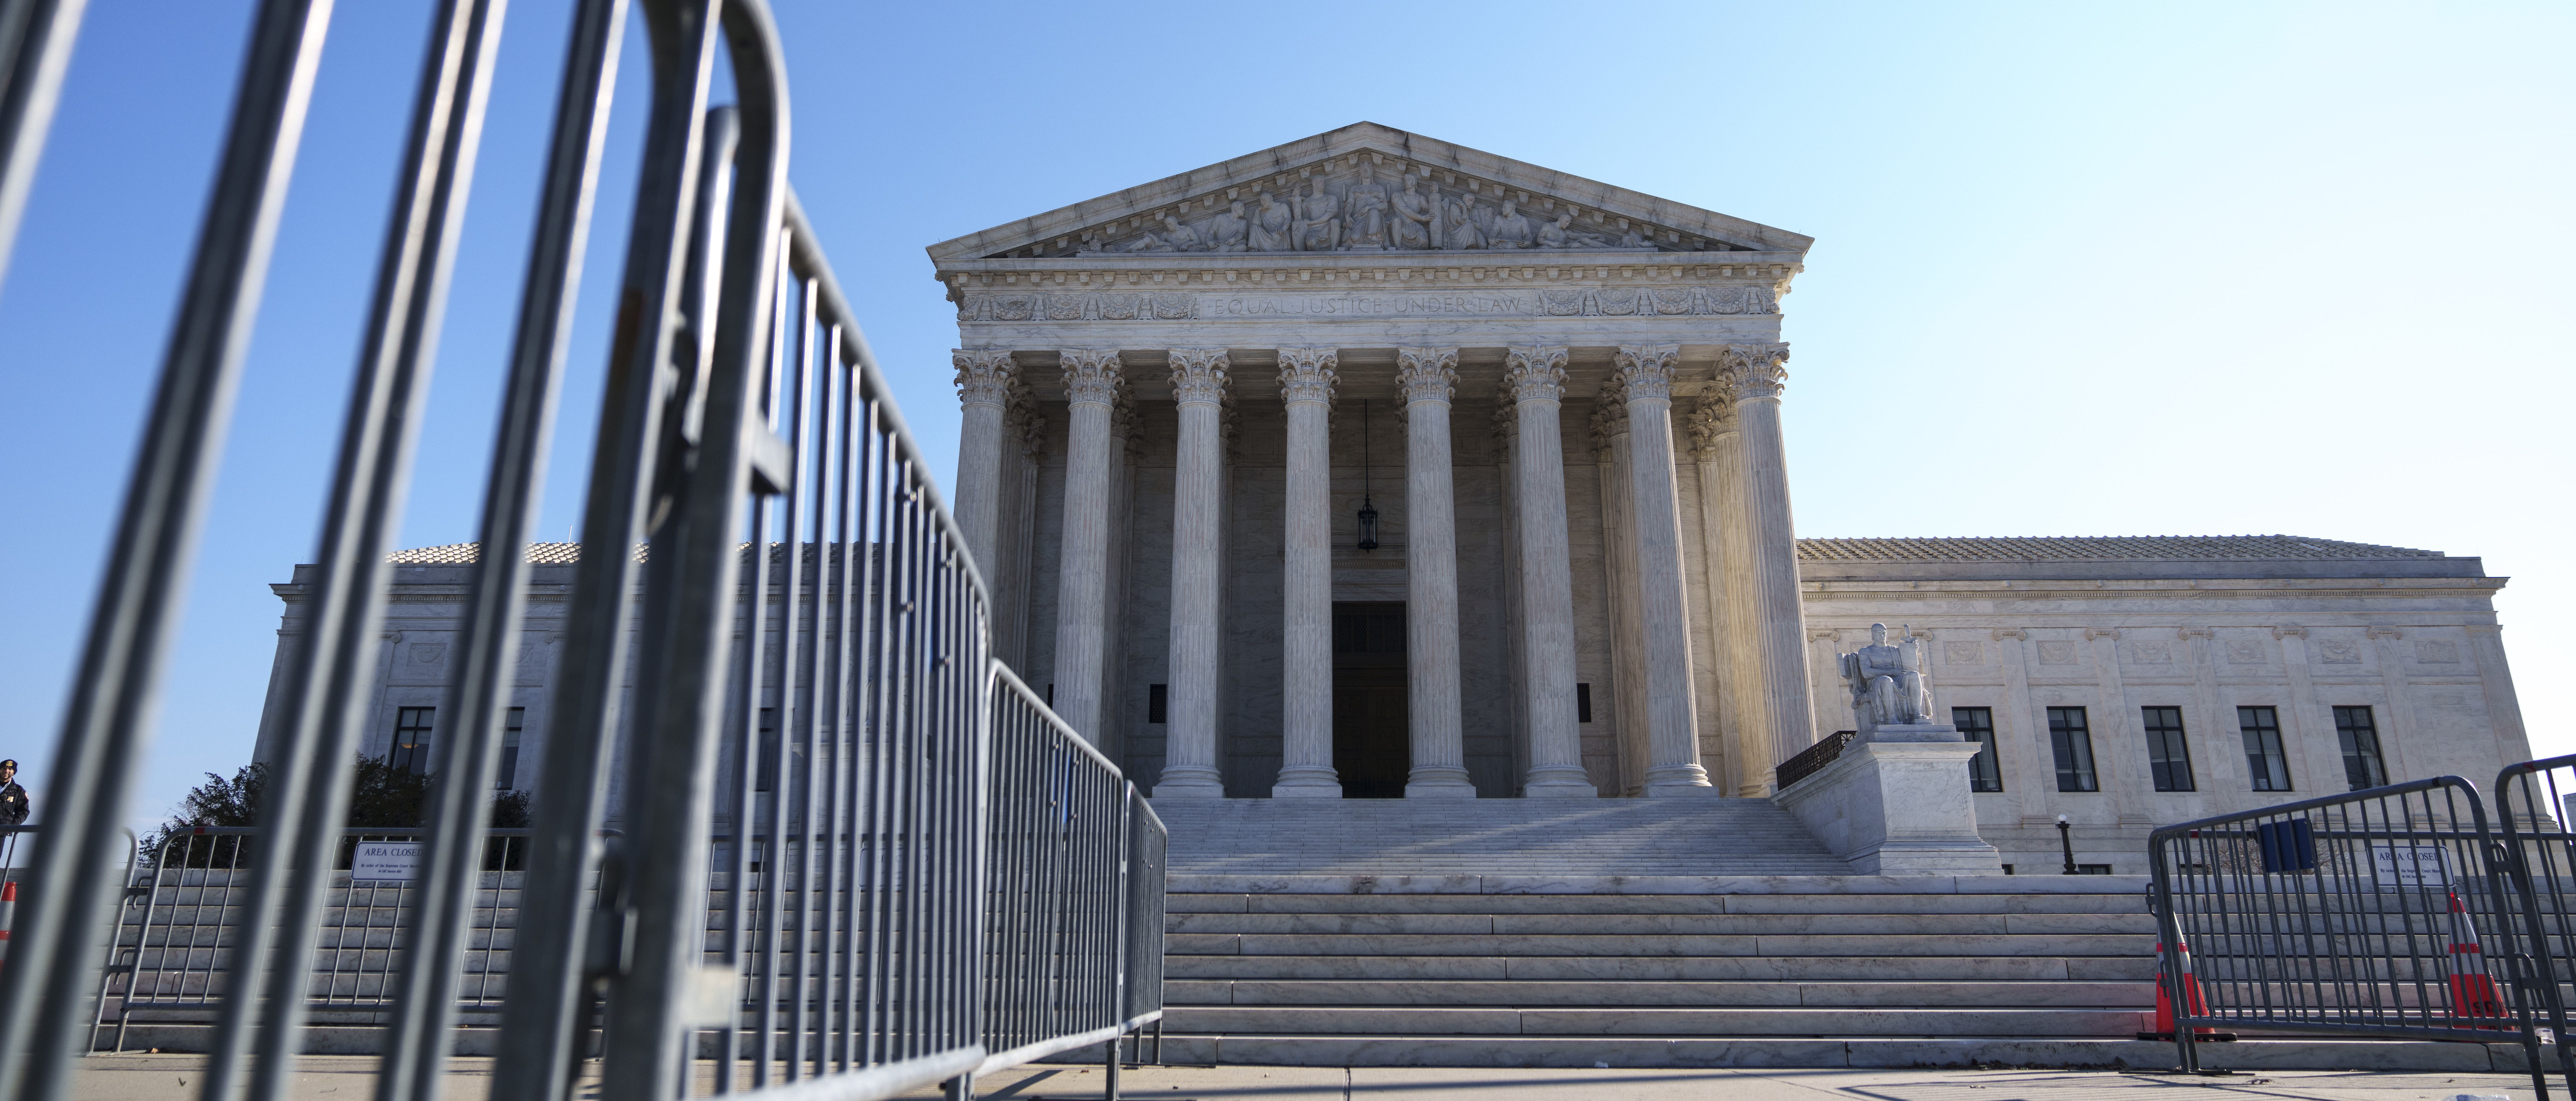 The U.S. Supreme Court building is seen on Jan. 24. (Drew Angerer/Getty Images)